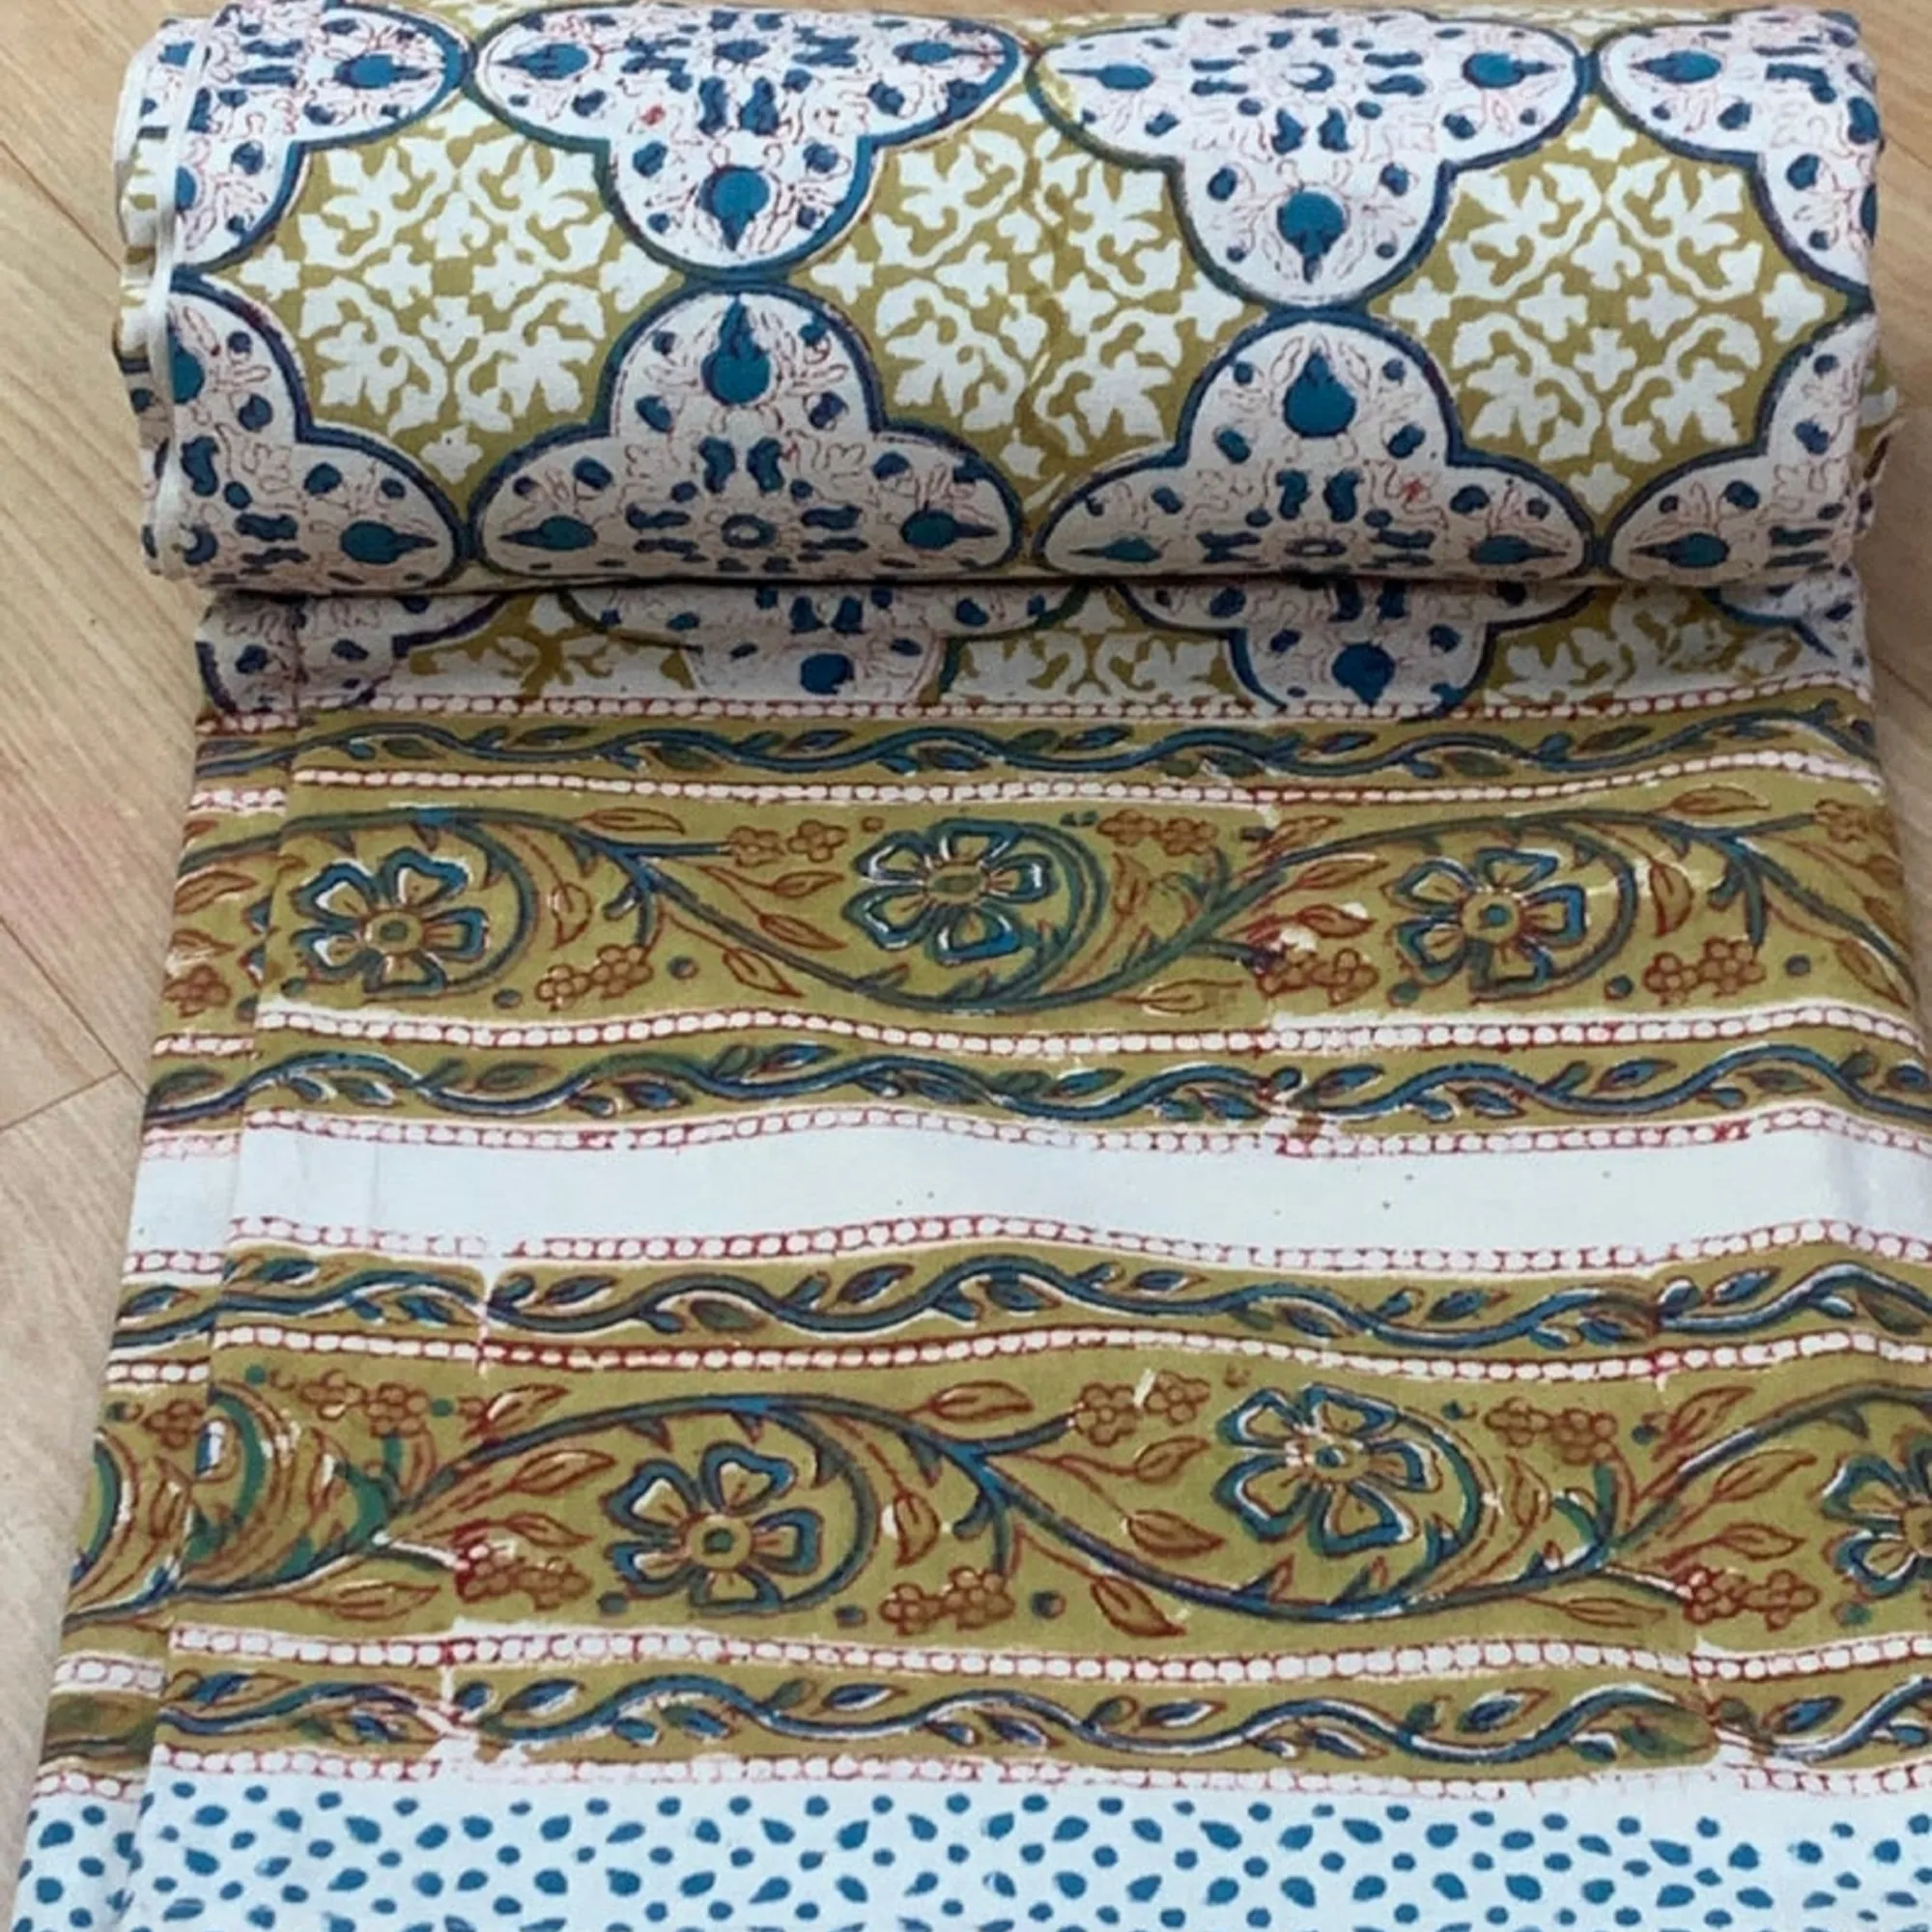 Block Printed Bedsheets Indian Print Wooden Print Bedsheets Bedding Sets Bedsoread Bedsheets And Duvet Cover Wholesale Price